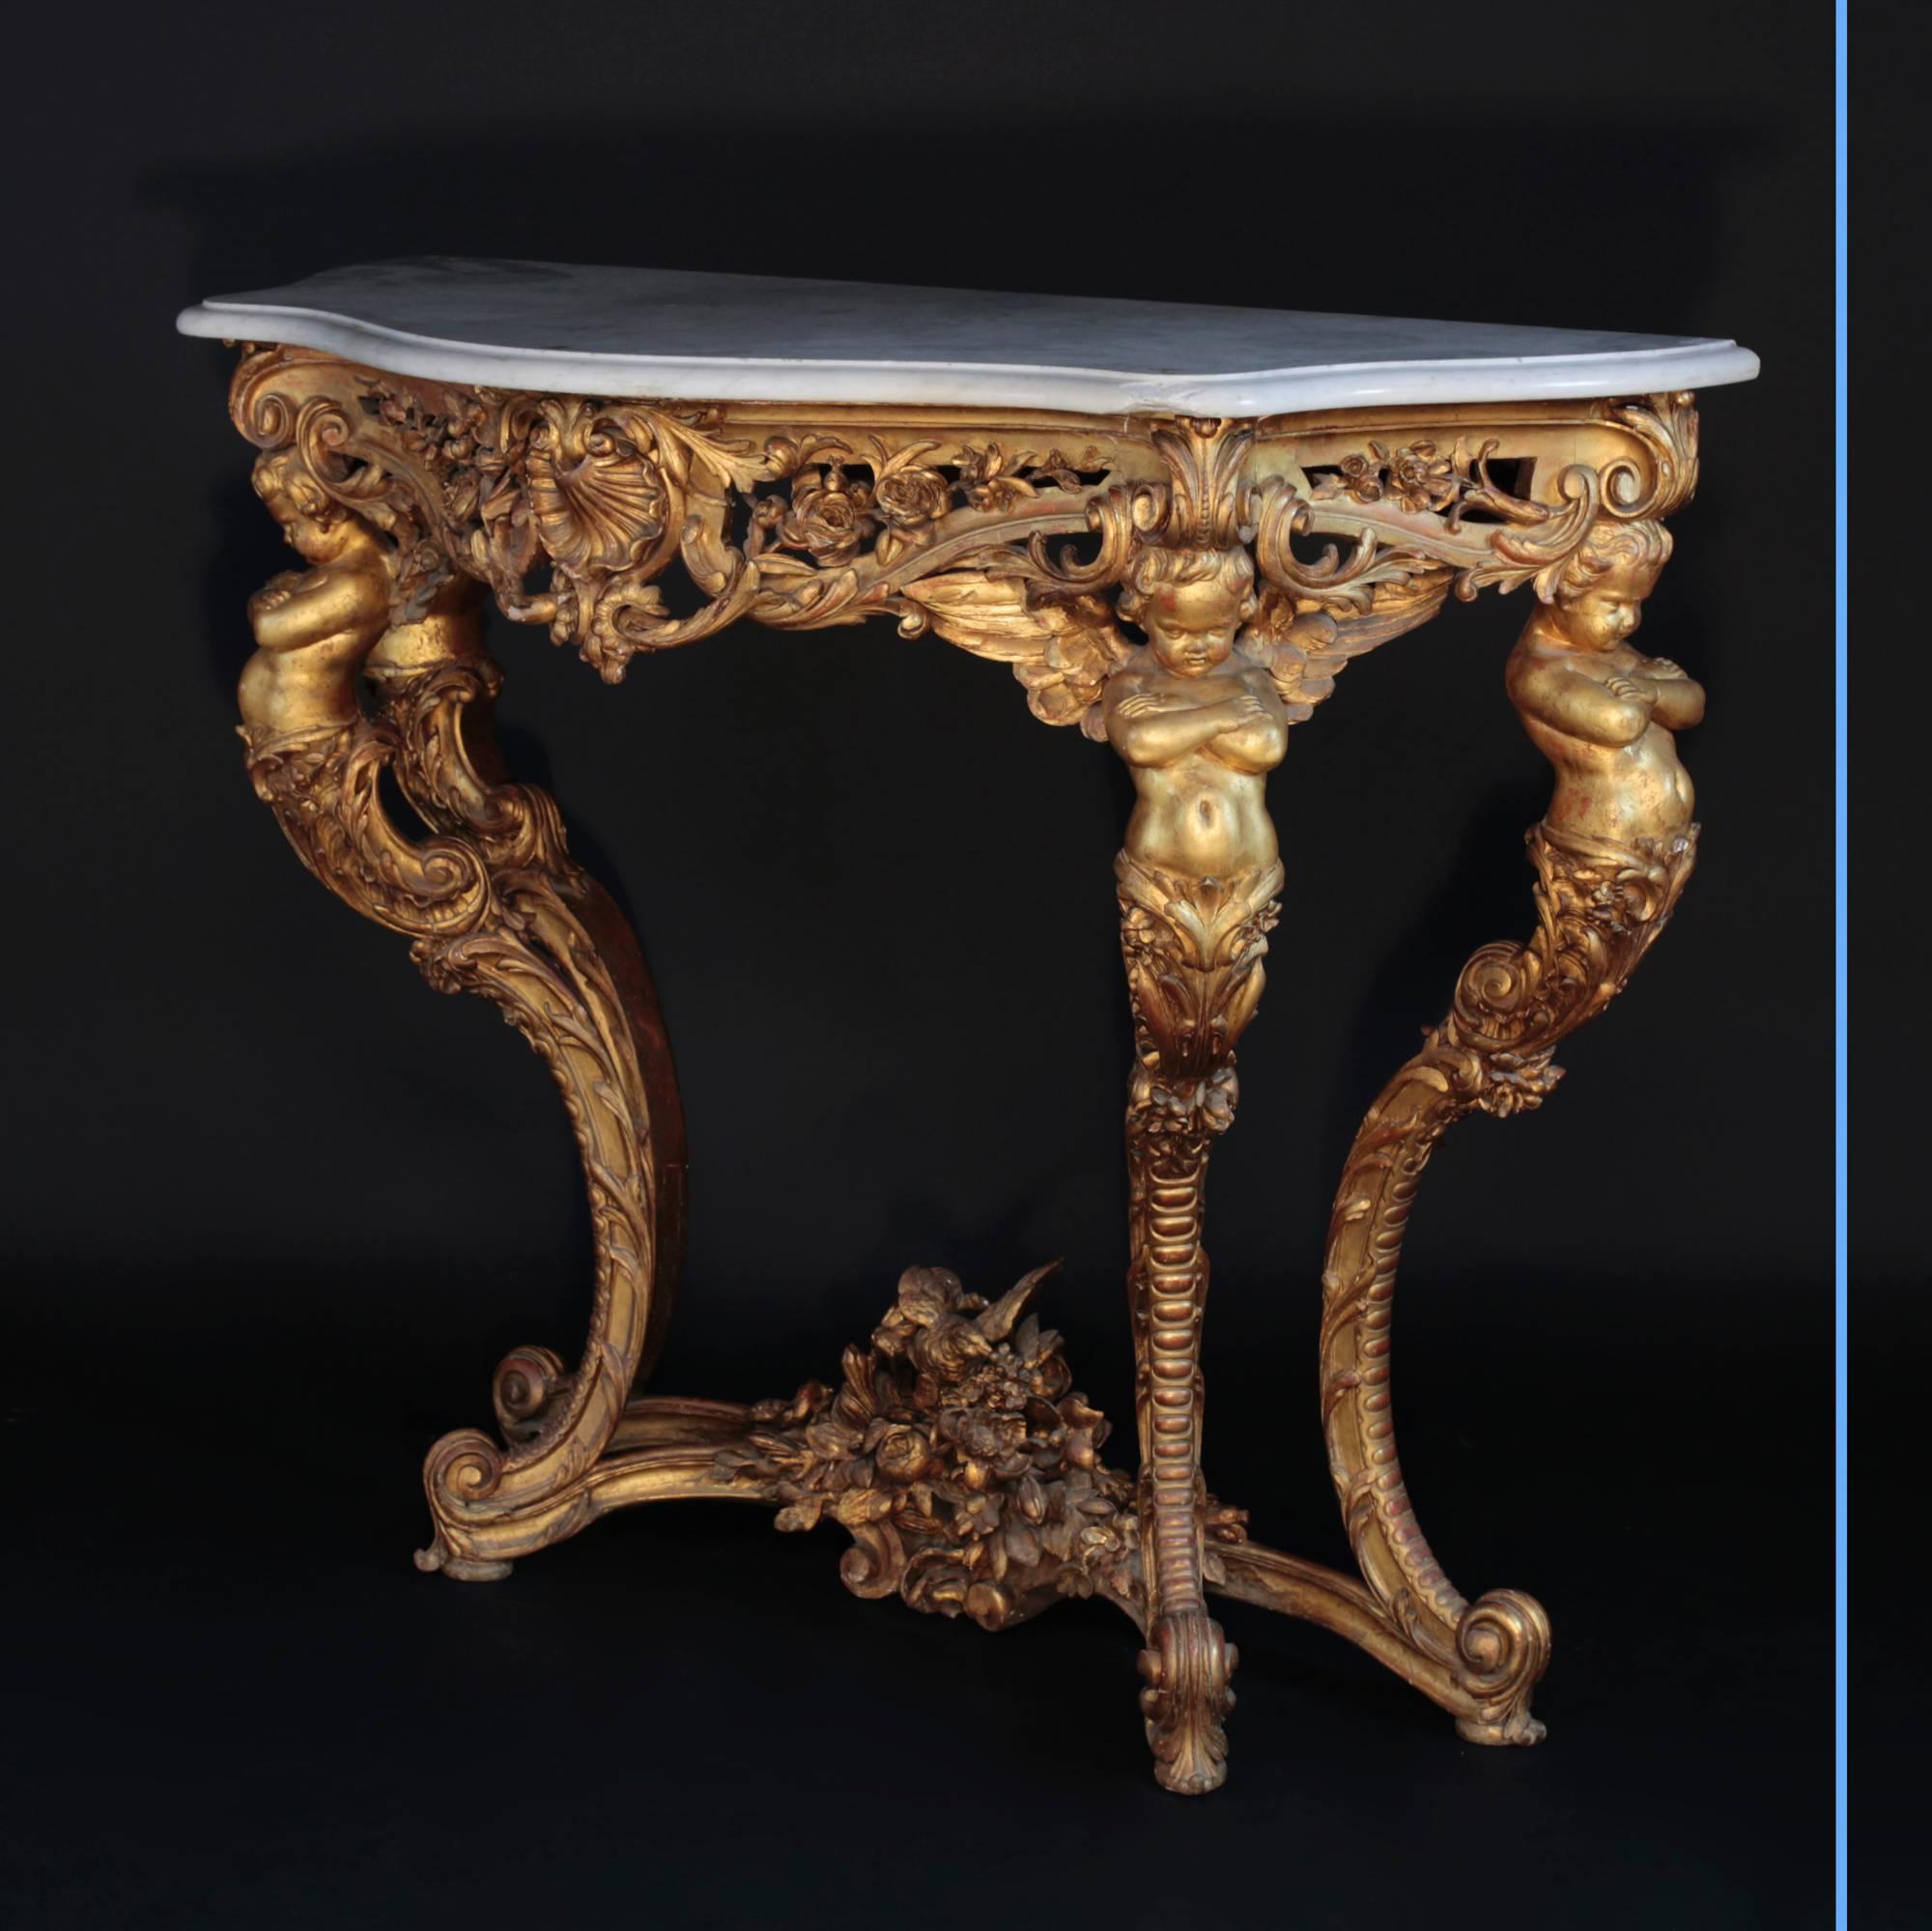 Napoleon III Elegant Wall Console Table with Putti, 19th Century For Sale